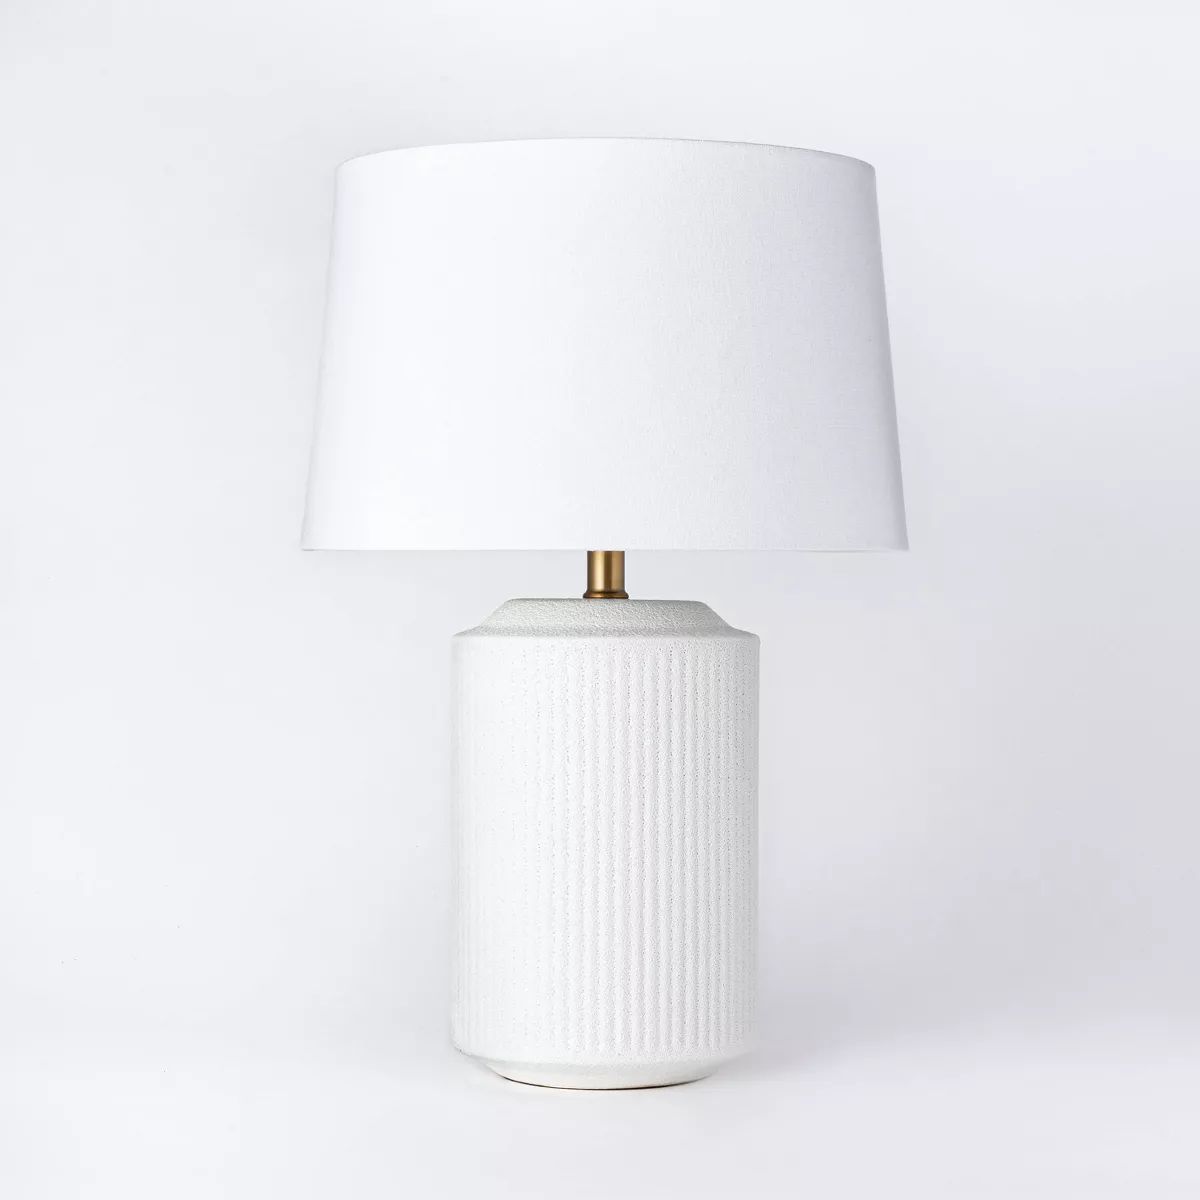 24"x16" Ceramic Assembled Table Lamp White - Threshold™ designed with Studio McGee | Target